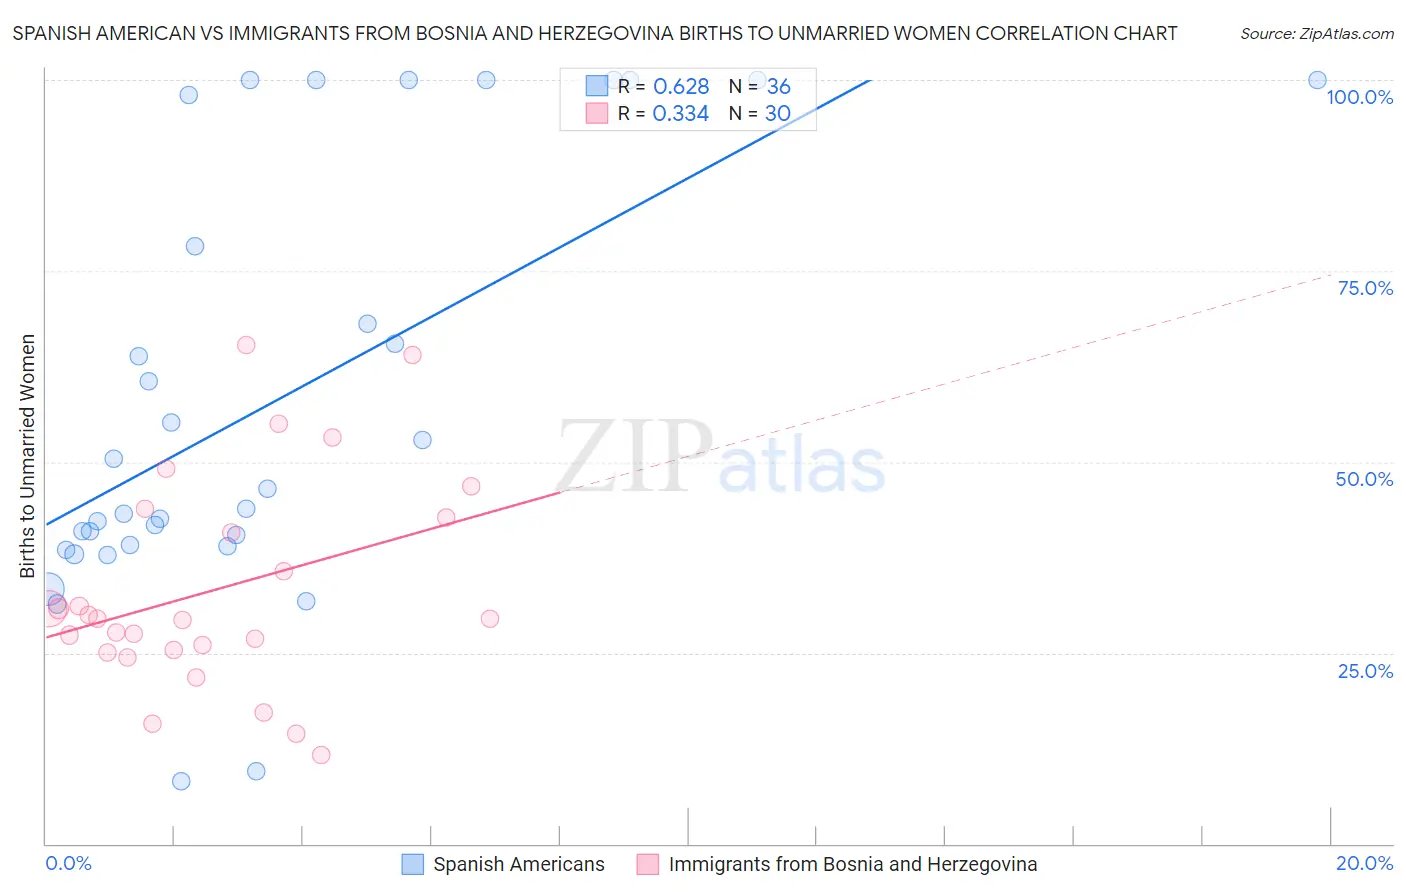 Spanish American vs Immigrants from Bosnia and Herzegovina Births to Unmarried Women